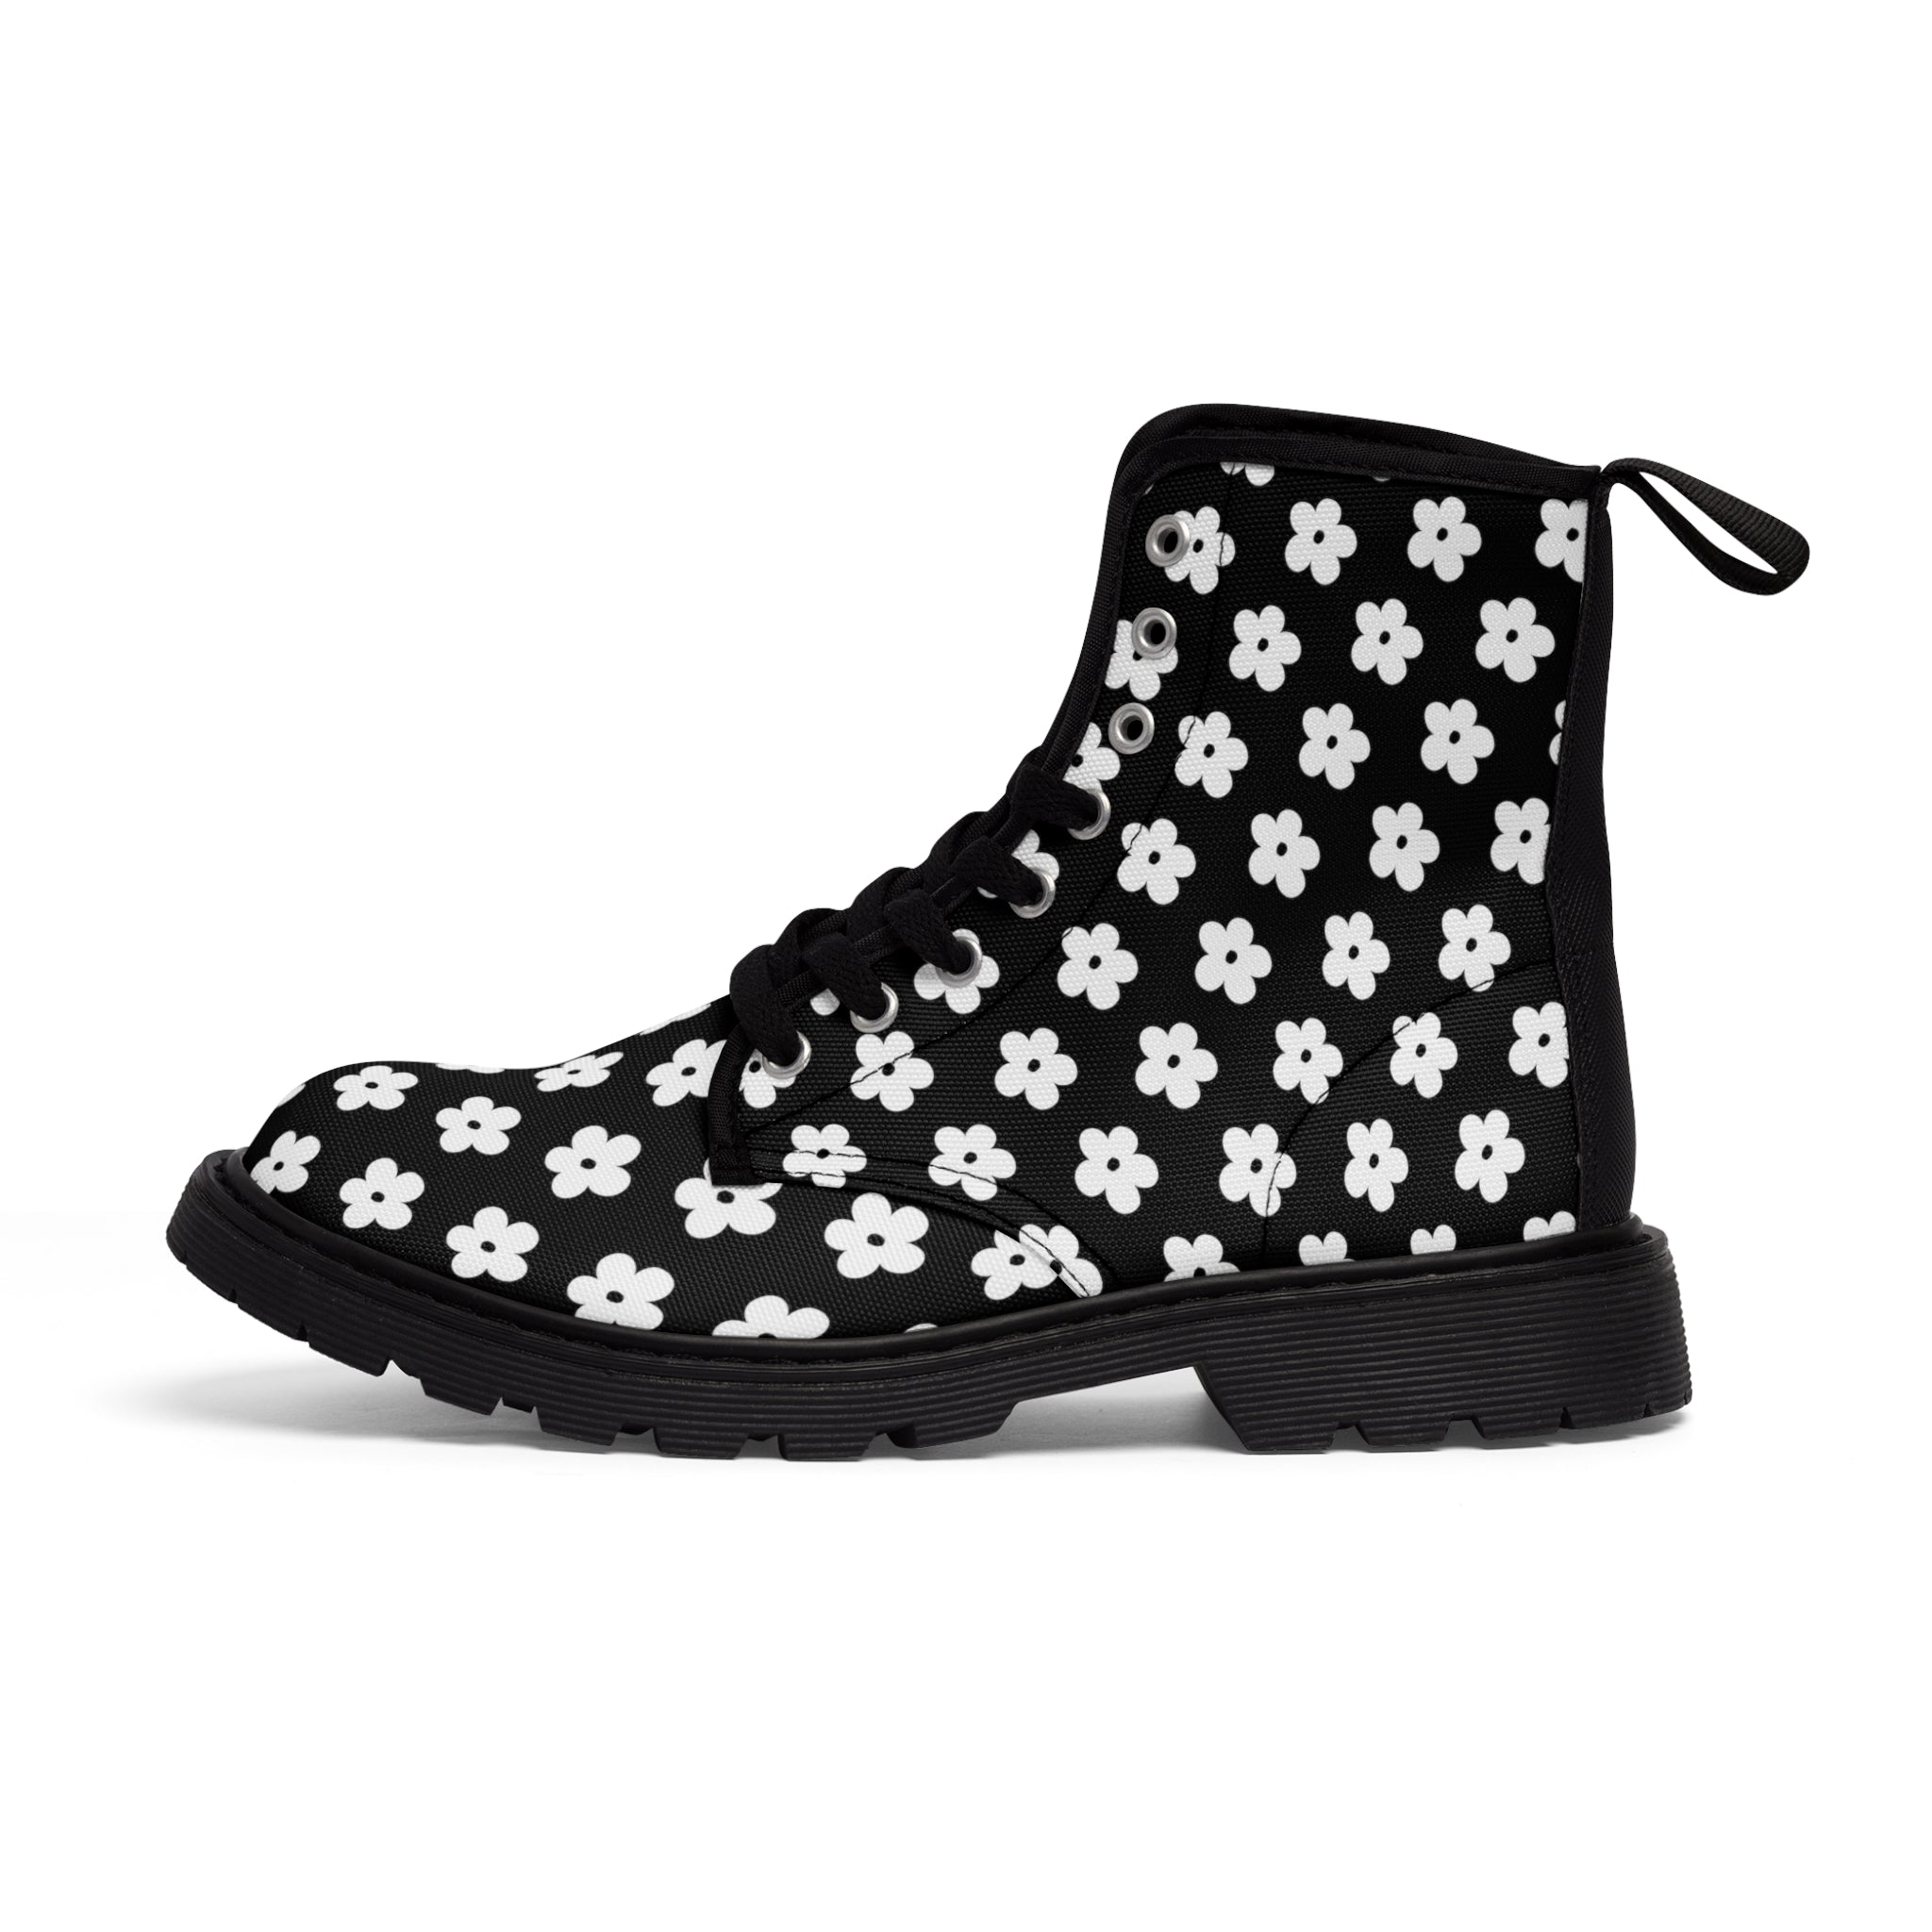 JUST BLOOM (White Pattern) Women's Black Canvas Boots Shoes  The Middle Aged Groove